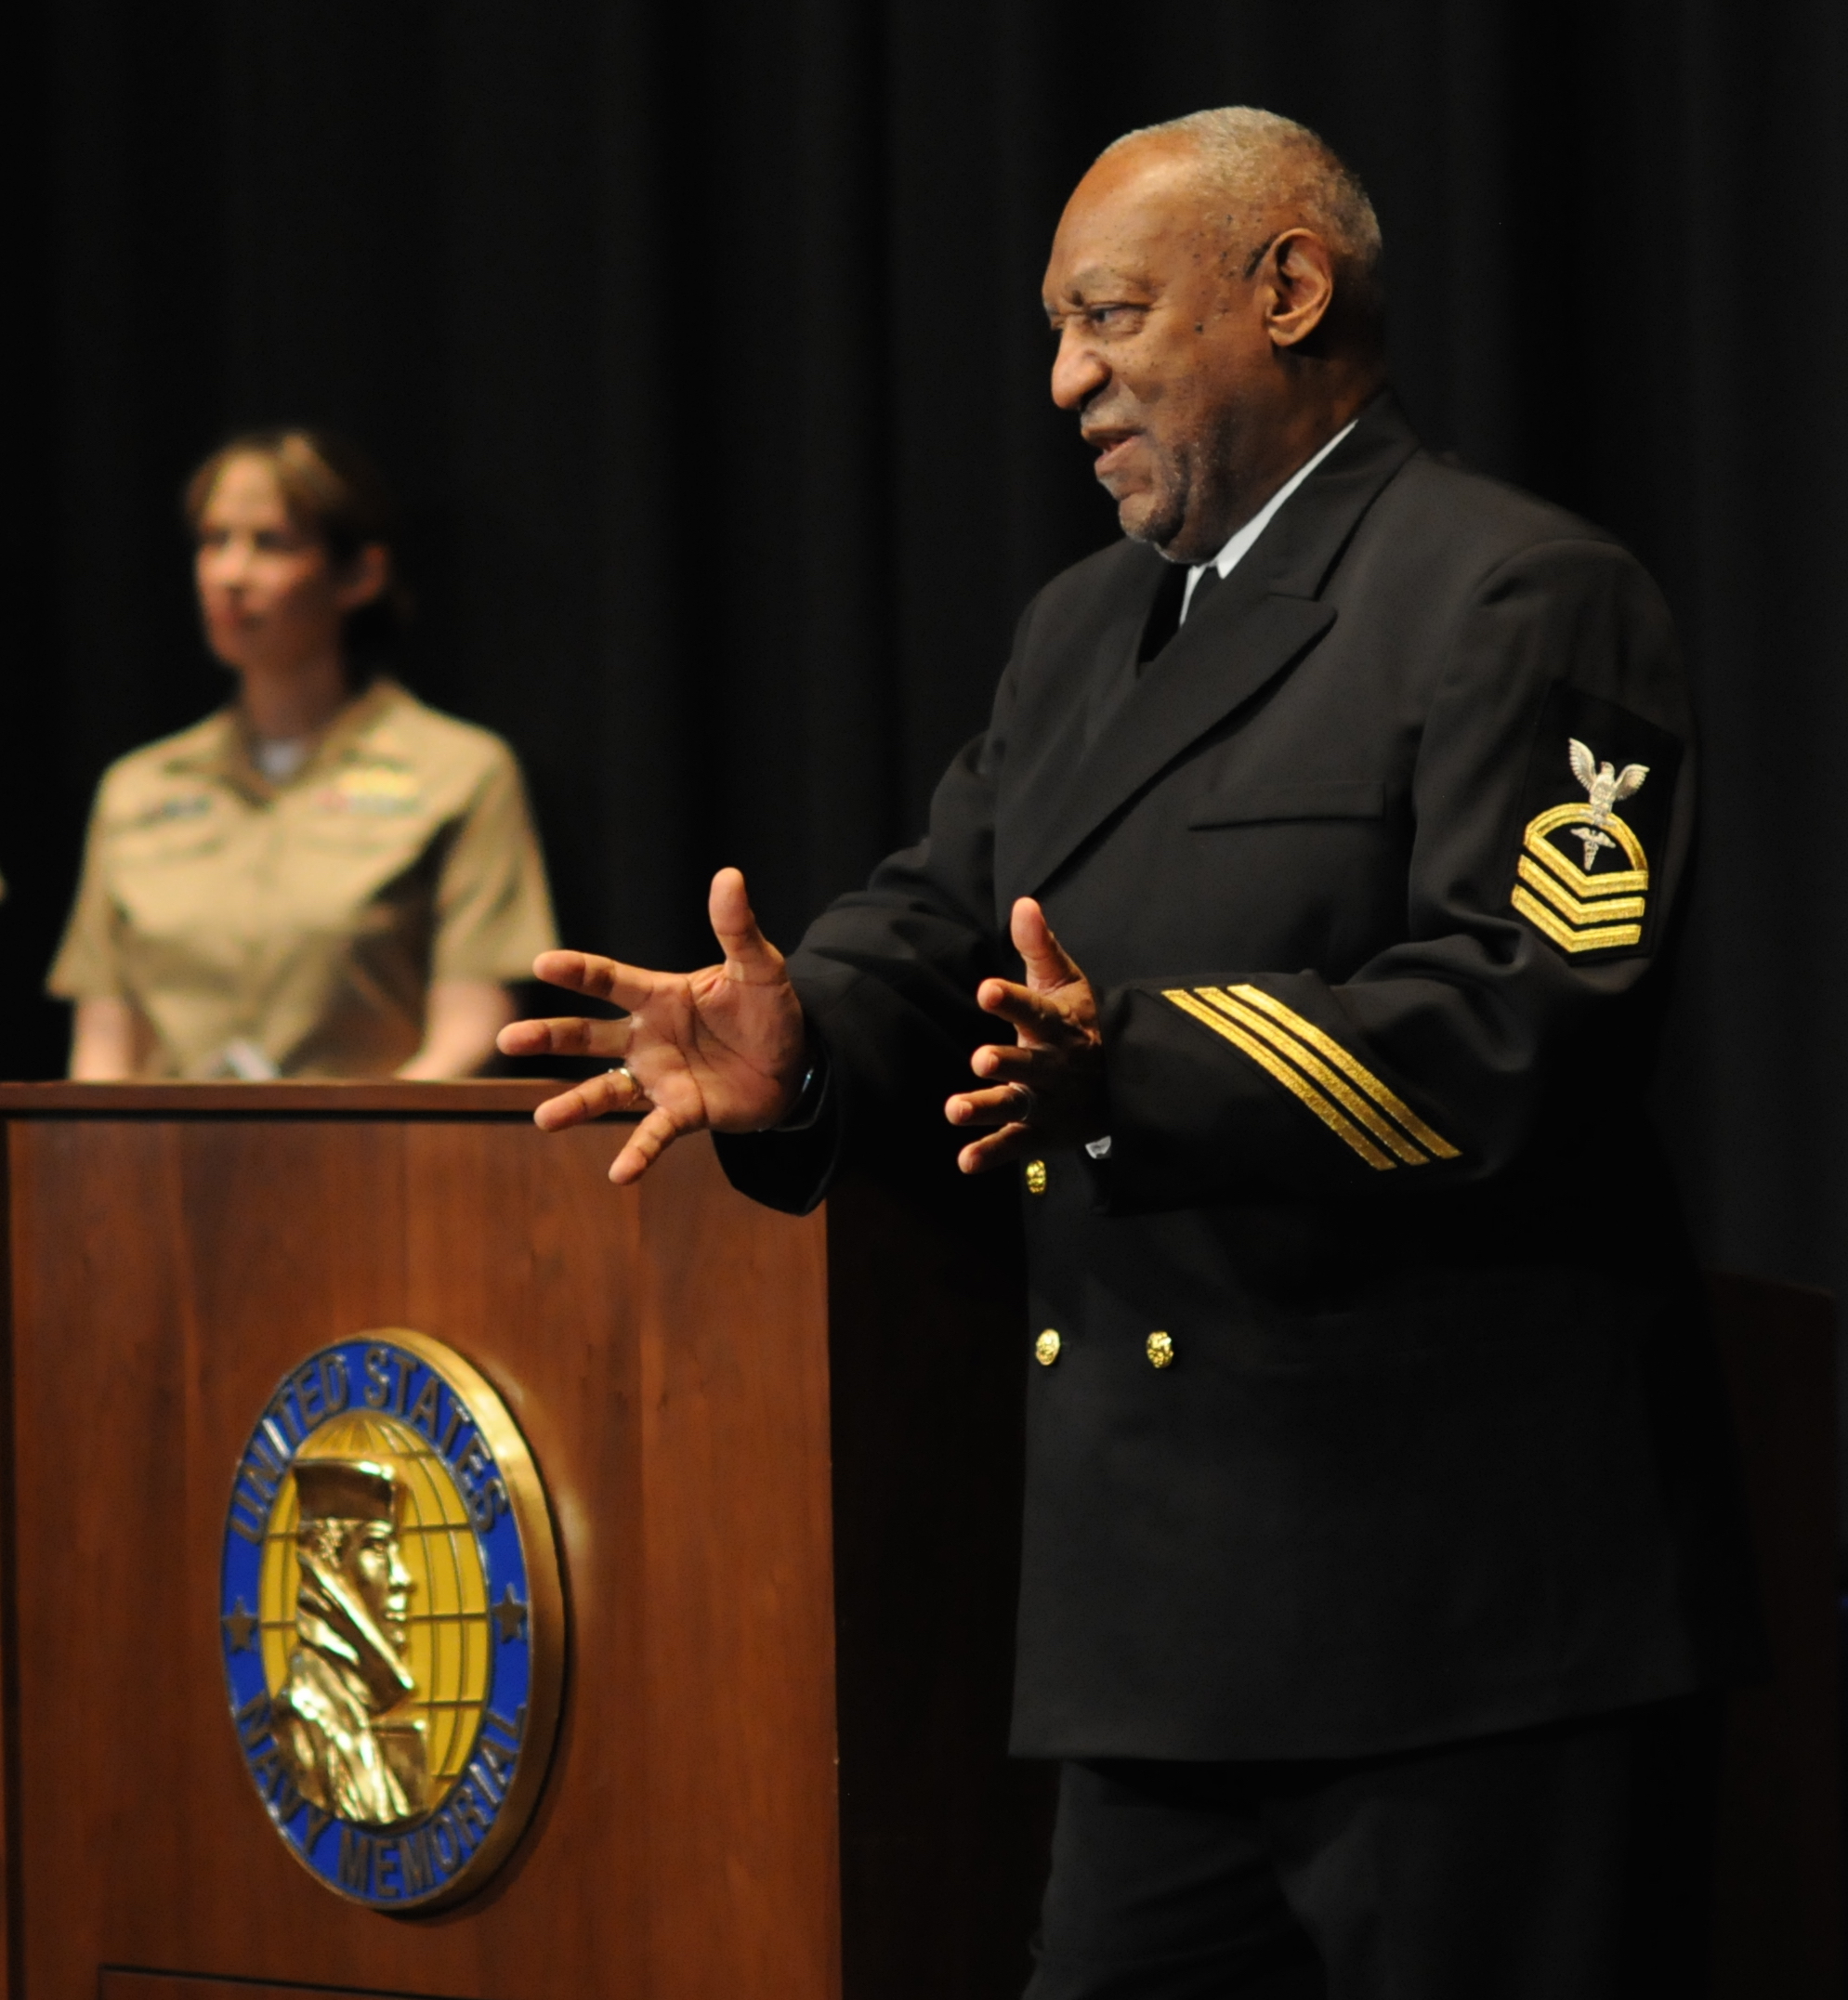 Bill Cosby in 2011 during the presentation of the title Honorary Chief Hospital Corpsman. The Navy pulled the title from Cosby on Dec. 4, 2014. US Navy Photo 